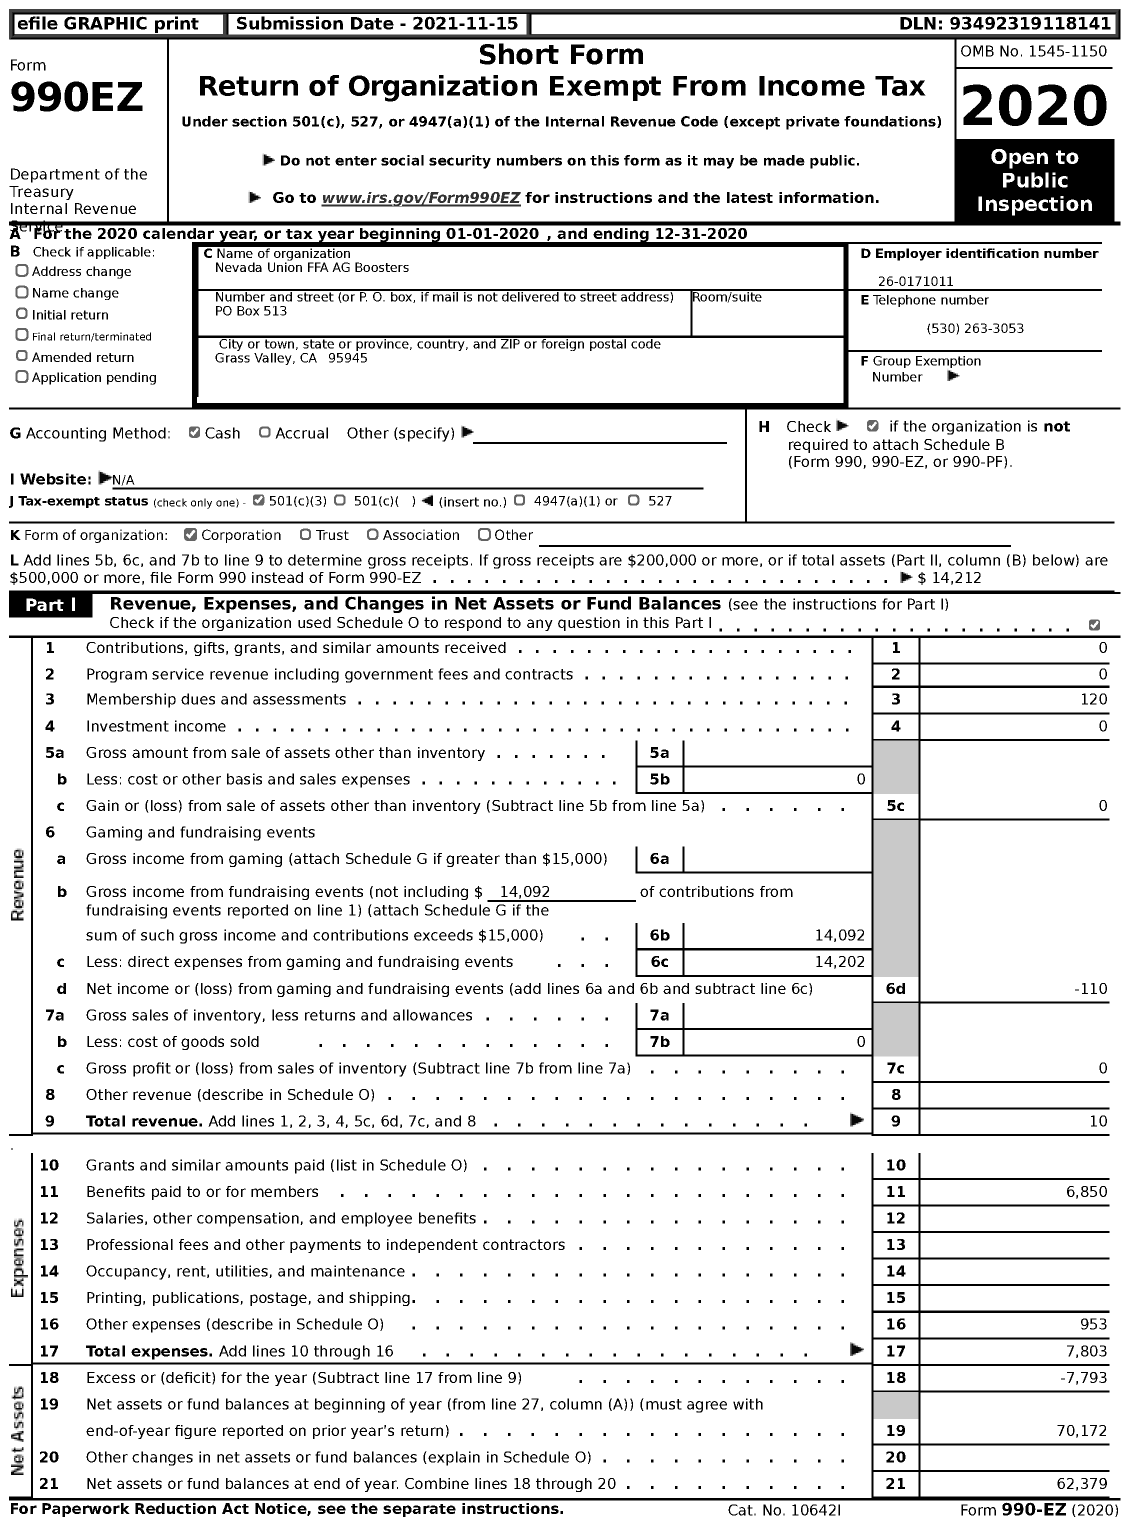 Image of first page of 2020 Form 990EZ for Nevada Union FFA AG Boosters